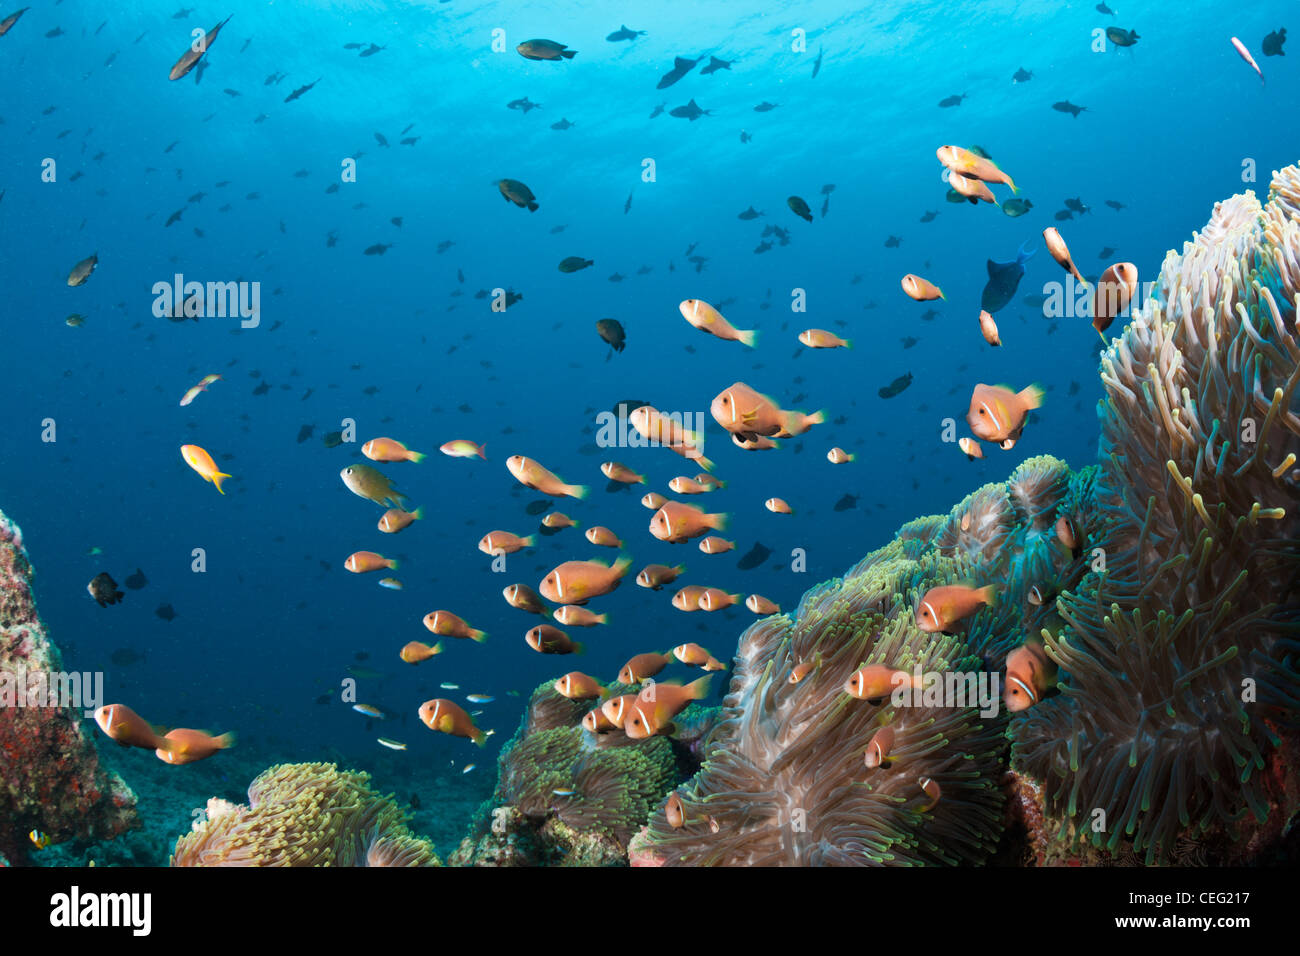 Family of endemic Maldives Anemonefish, Amphiprion nigripes, North Male Atoll, Indian Ocean, Maldives Stock Photo